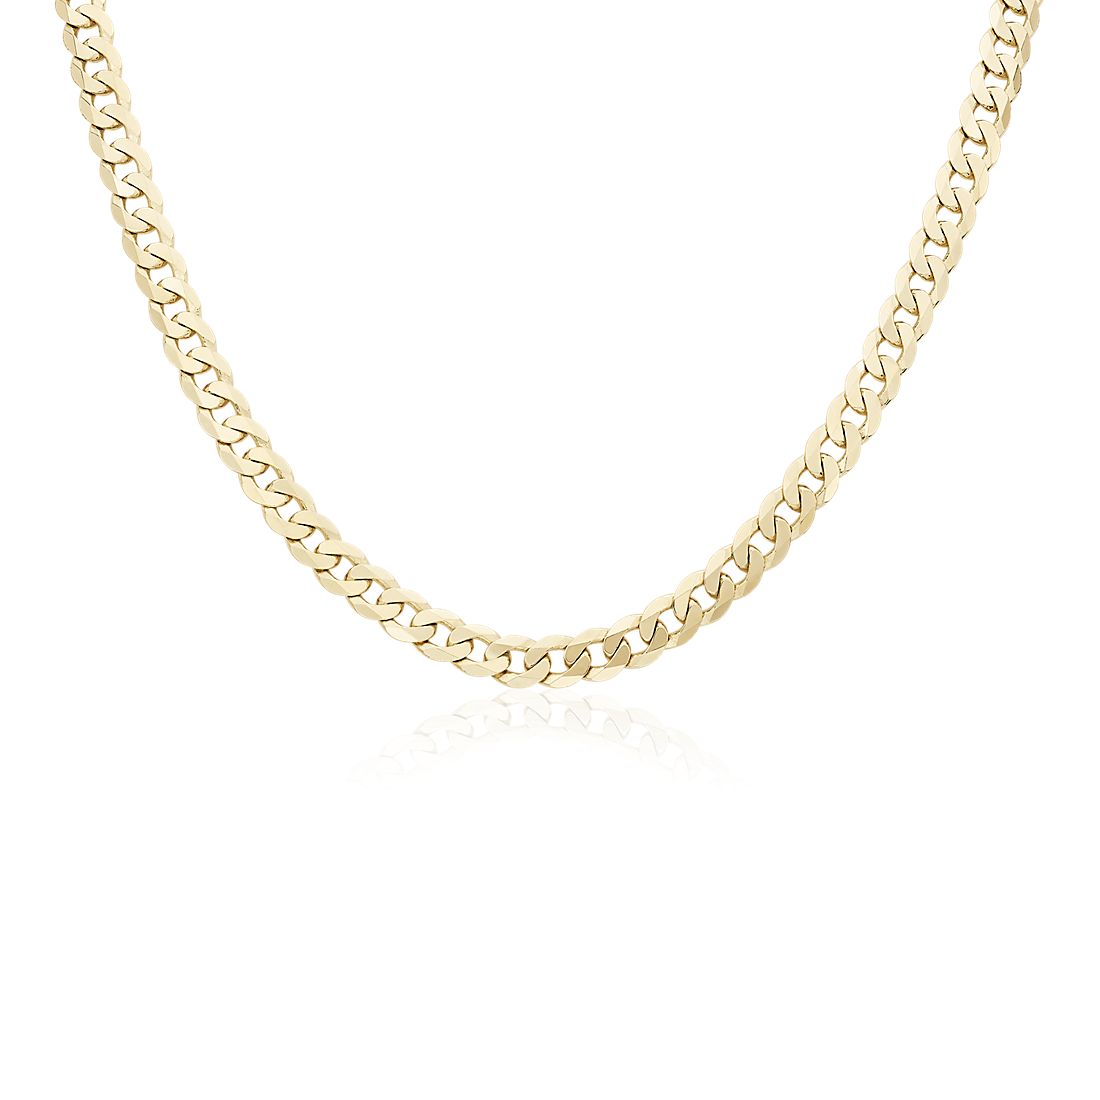 22" Men's Flat Beveled Curb Chain in 14k Yellow Gold (6.25 mm)